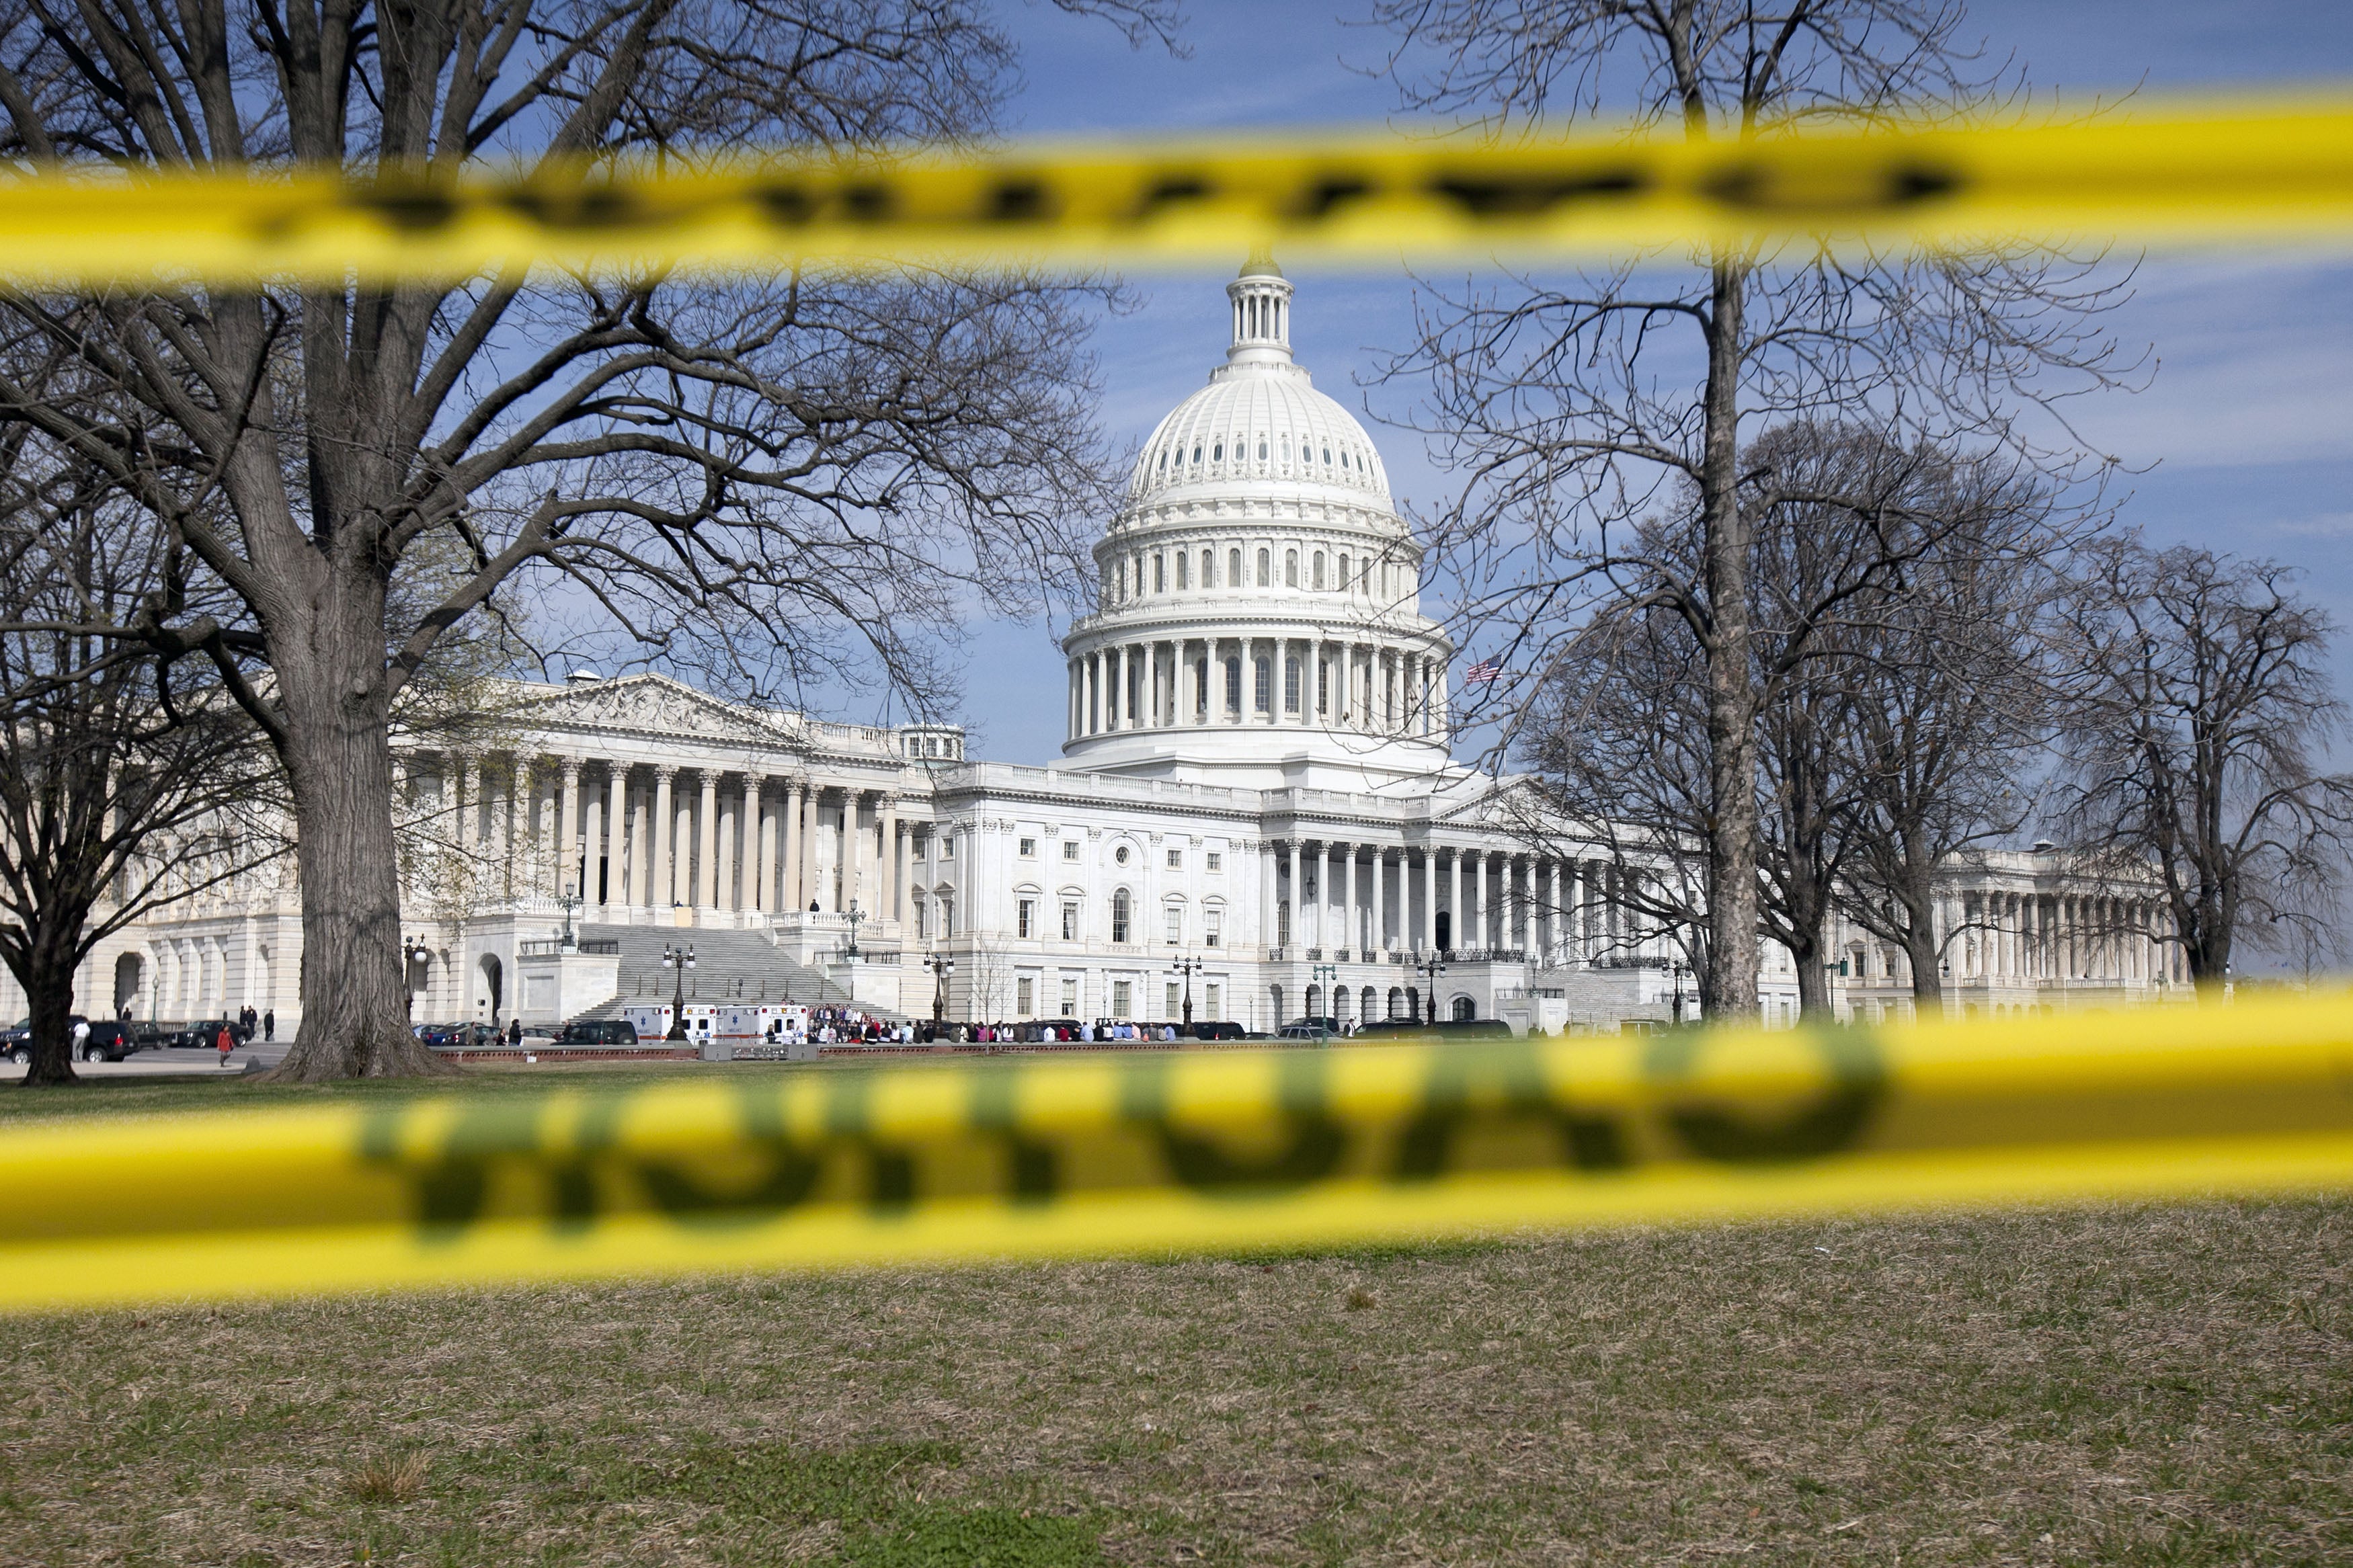 The Capitol building stands behind caution tape